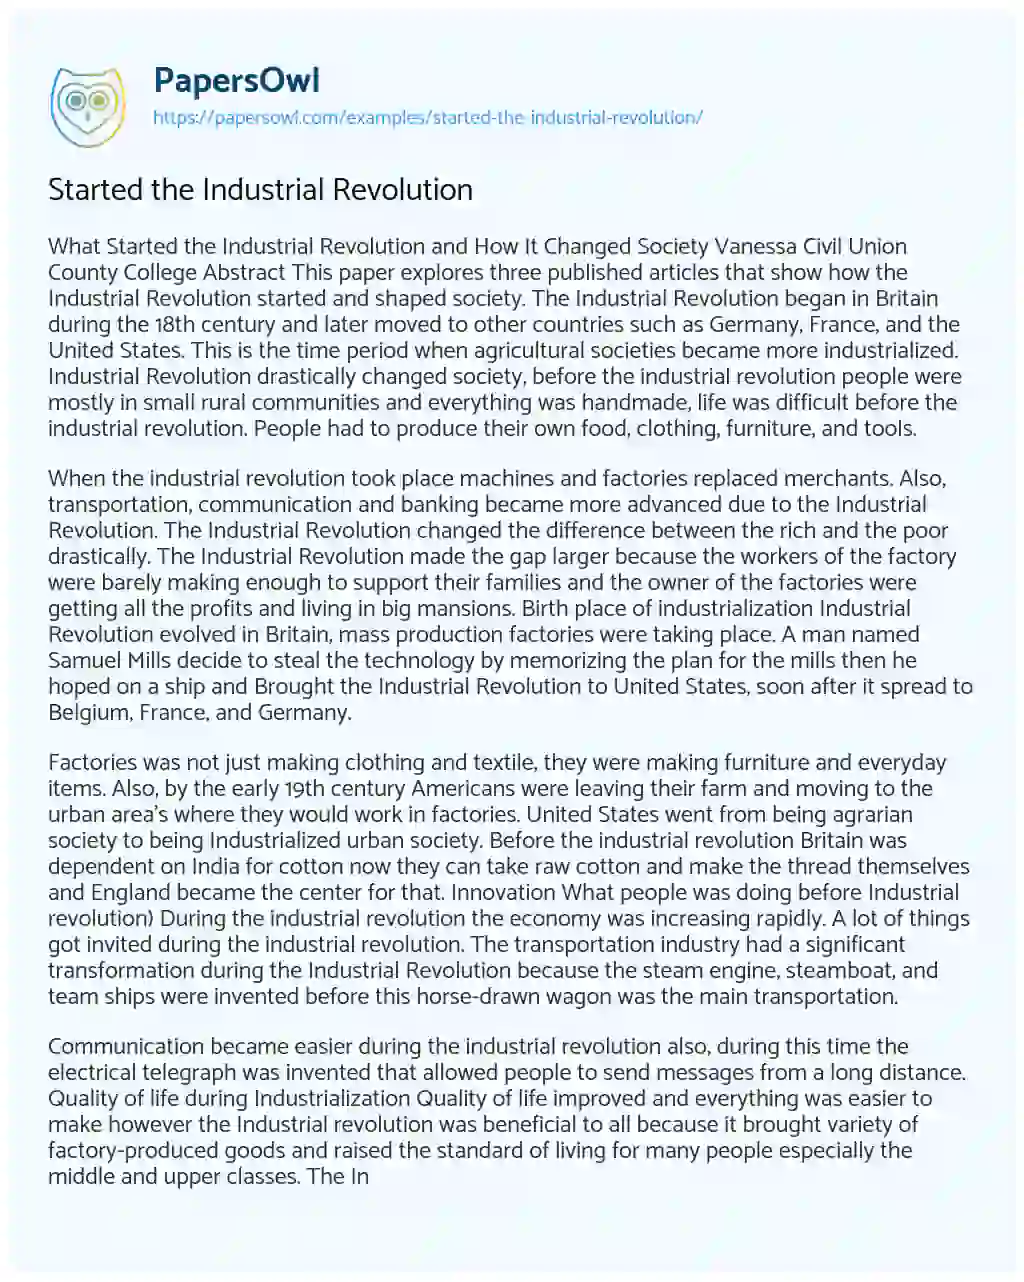 Started the Industrial Revolution essay